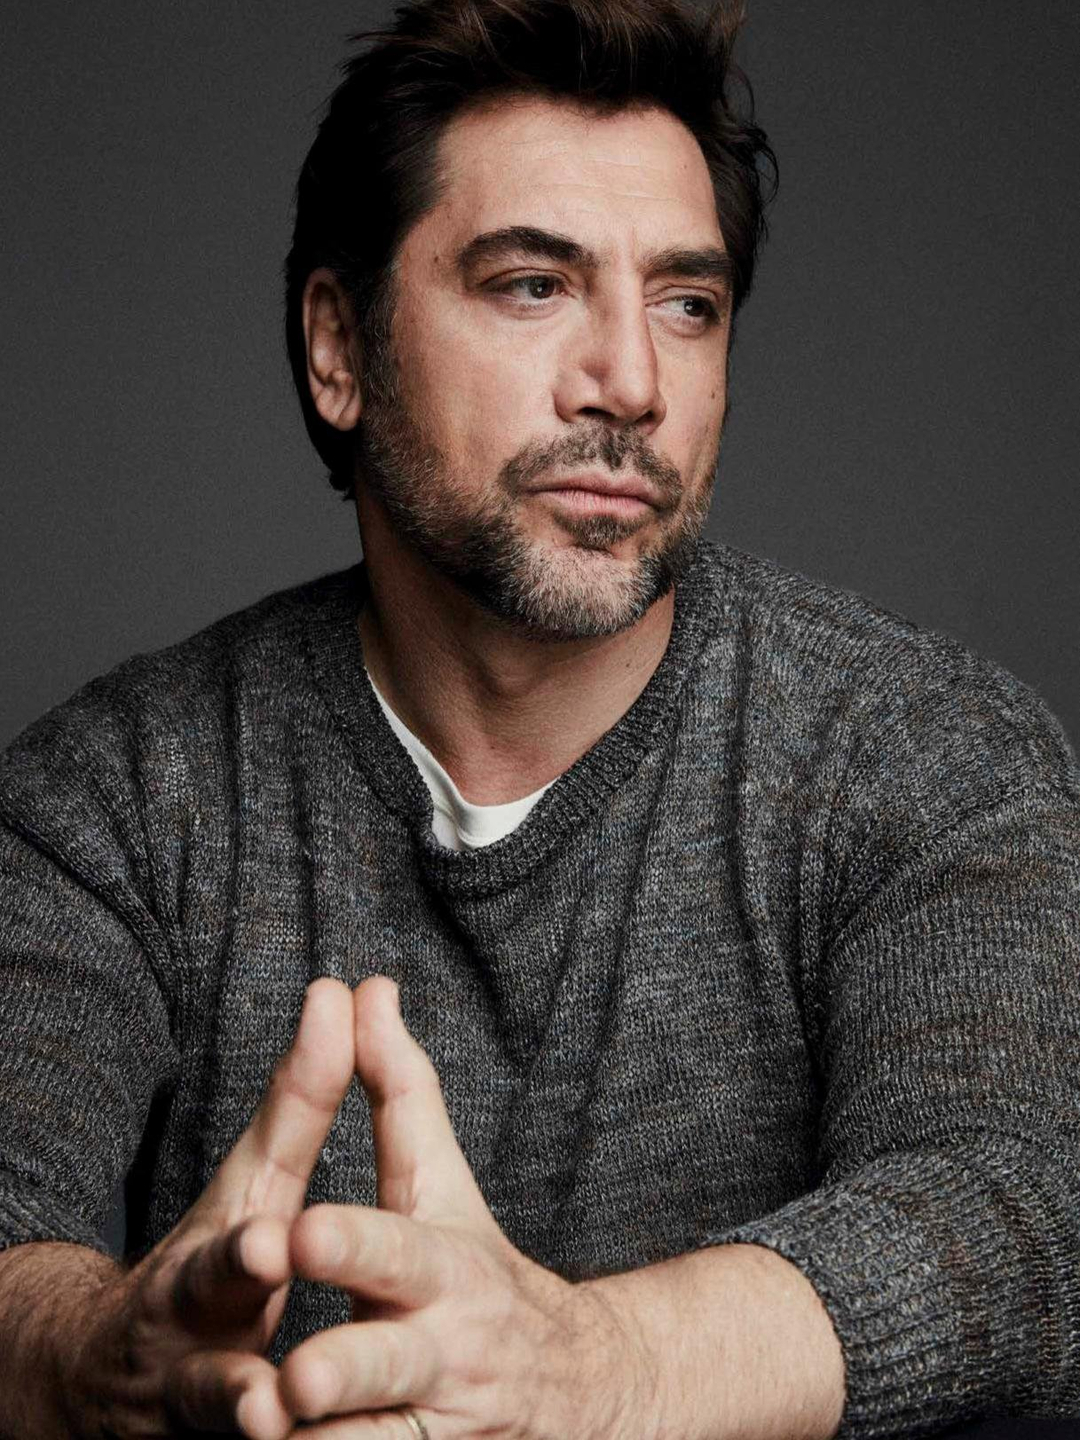 Javier Bardem who is his mother